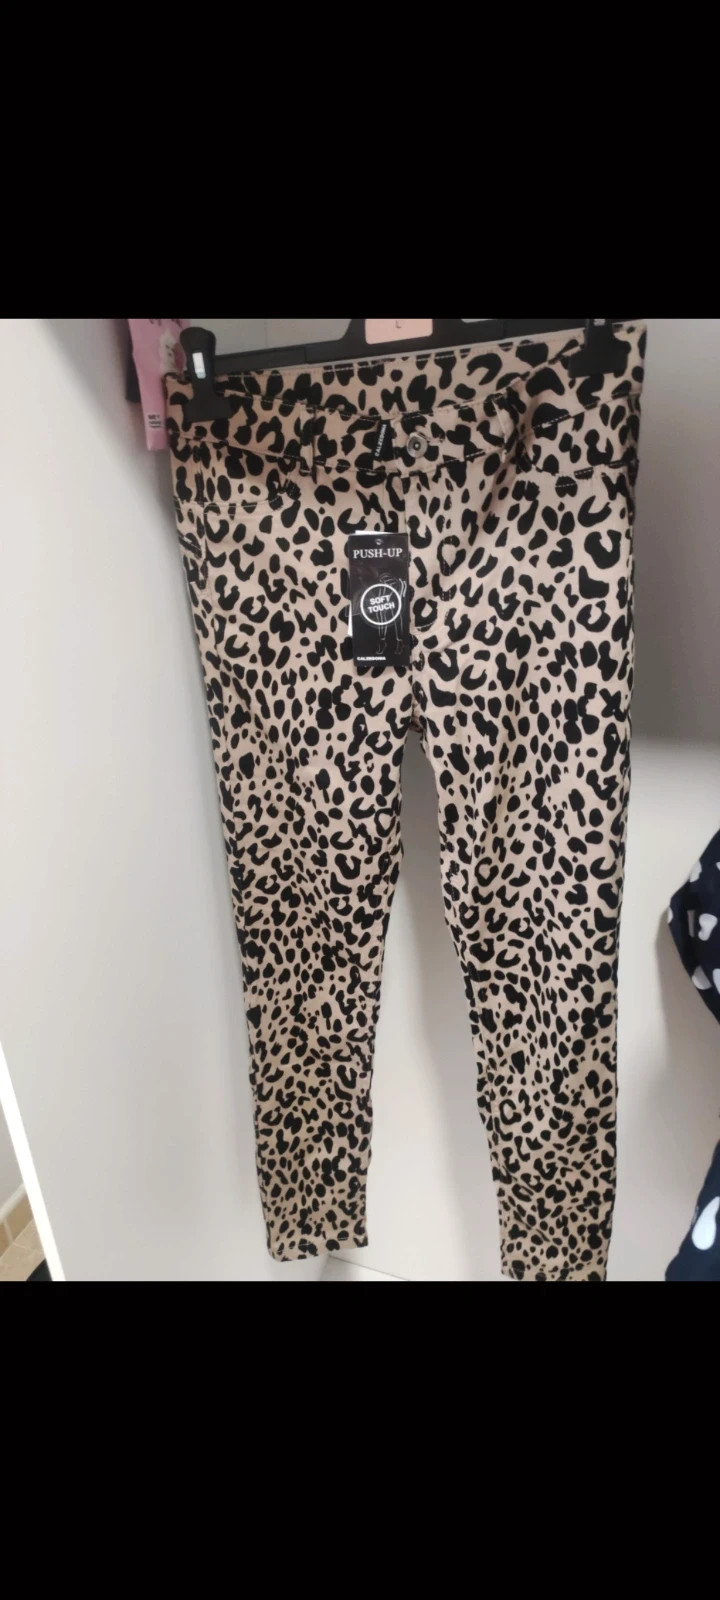 LEOPARD PRINT GYM Leggings Calzedonia Brand New With Tags Size